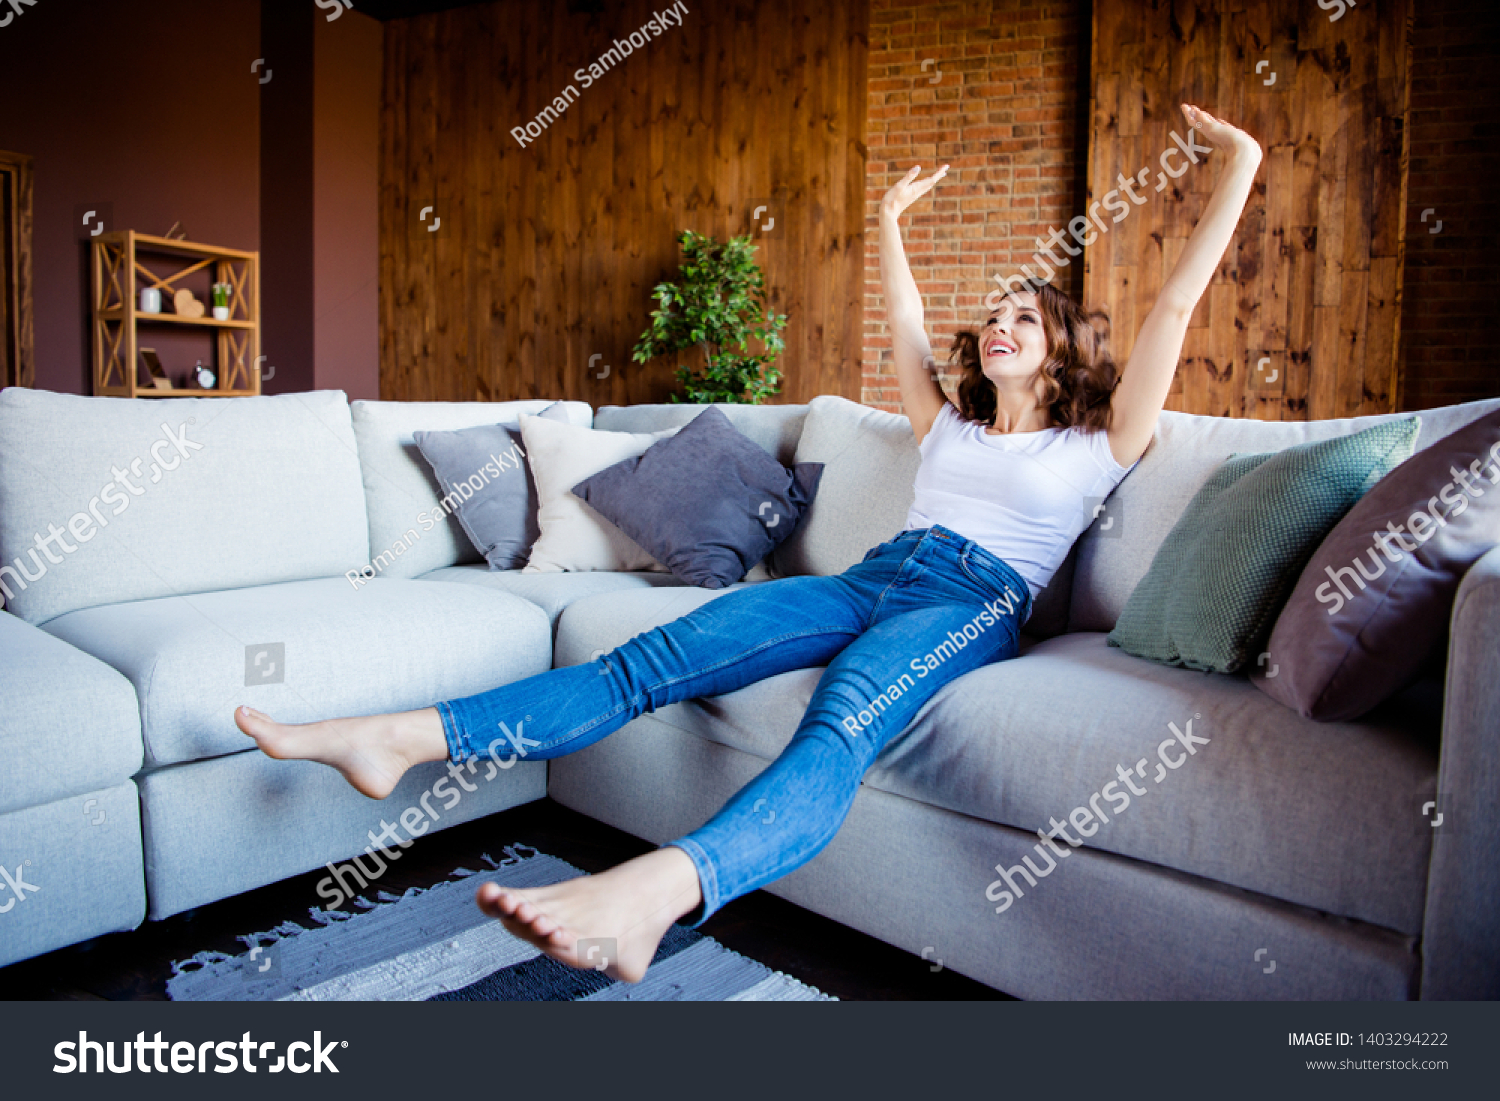 Full length body size view of her she nice attractive lovely charming cheerful cheery wavy-haired girl sitting on comfortable divan having fun time at industrial loft wooden brick style interior #1403294222